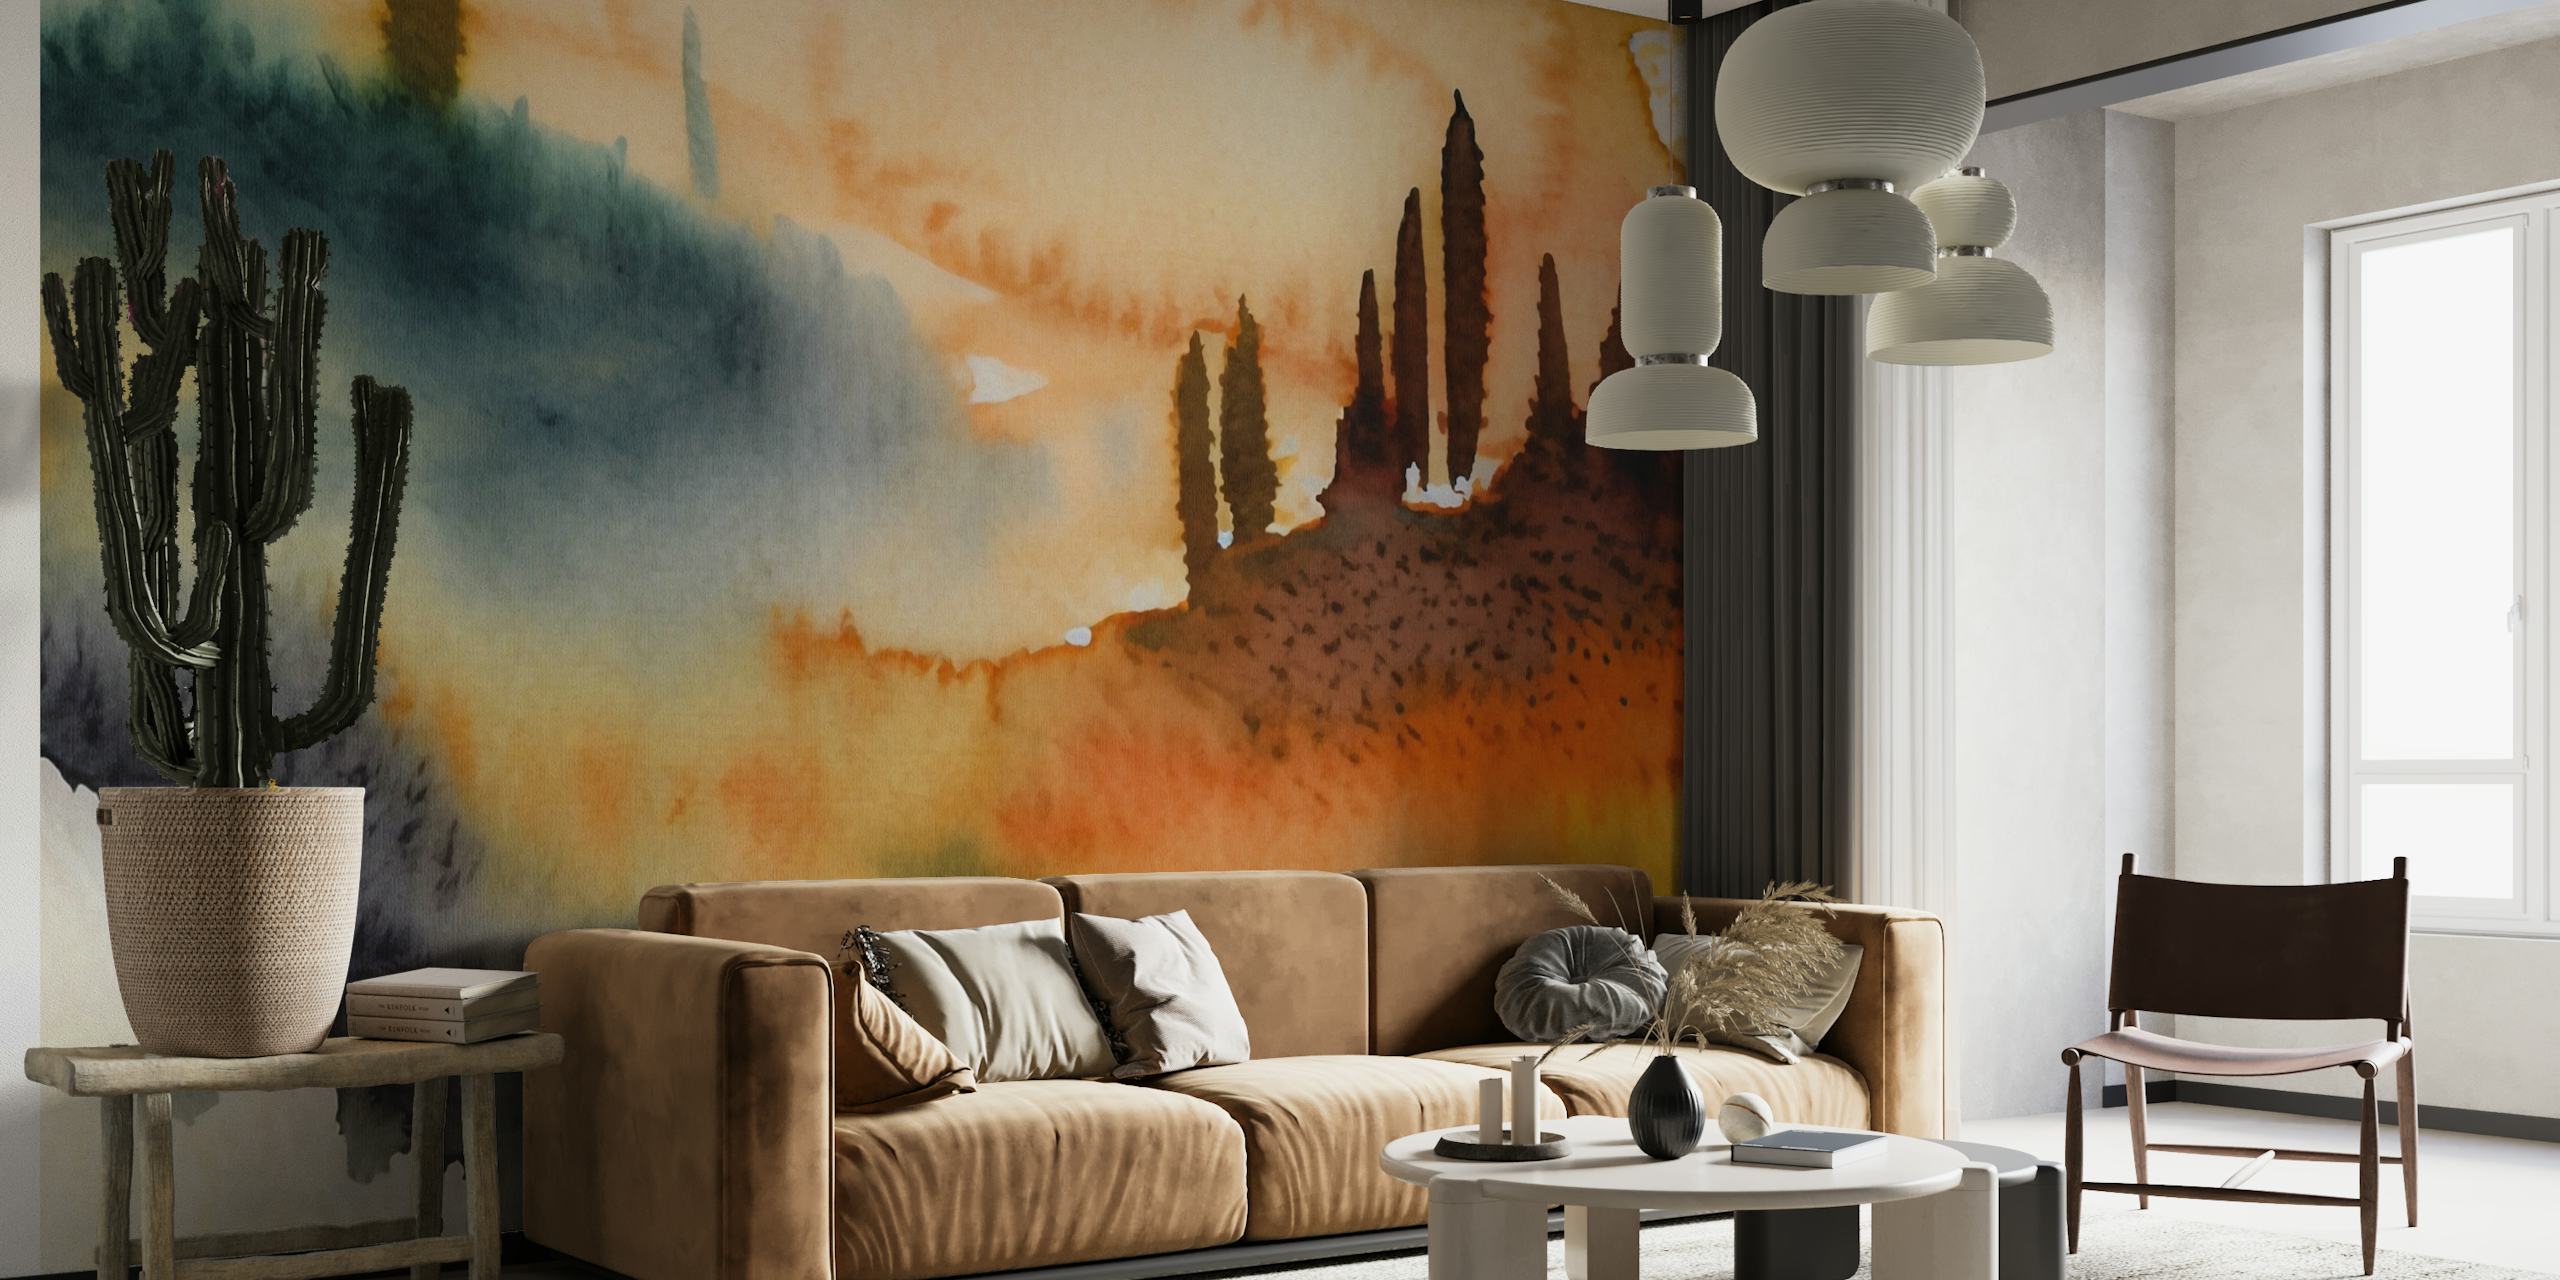 Tuscany countryside watercolor wall mural with warm sunset hues and rolling hills